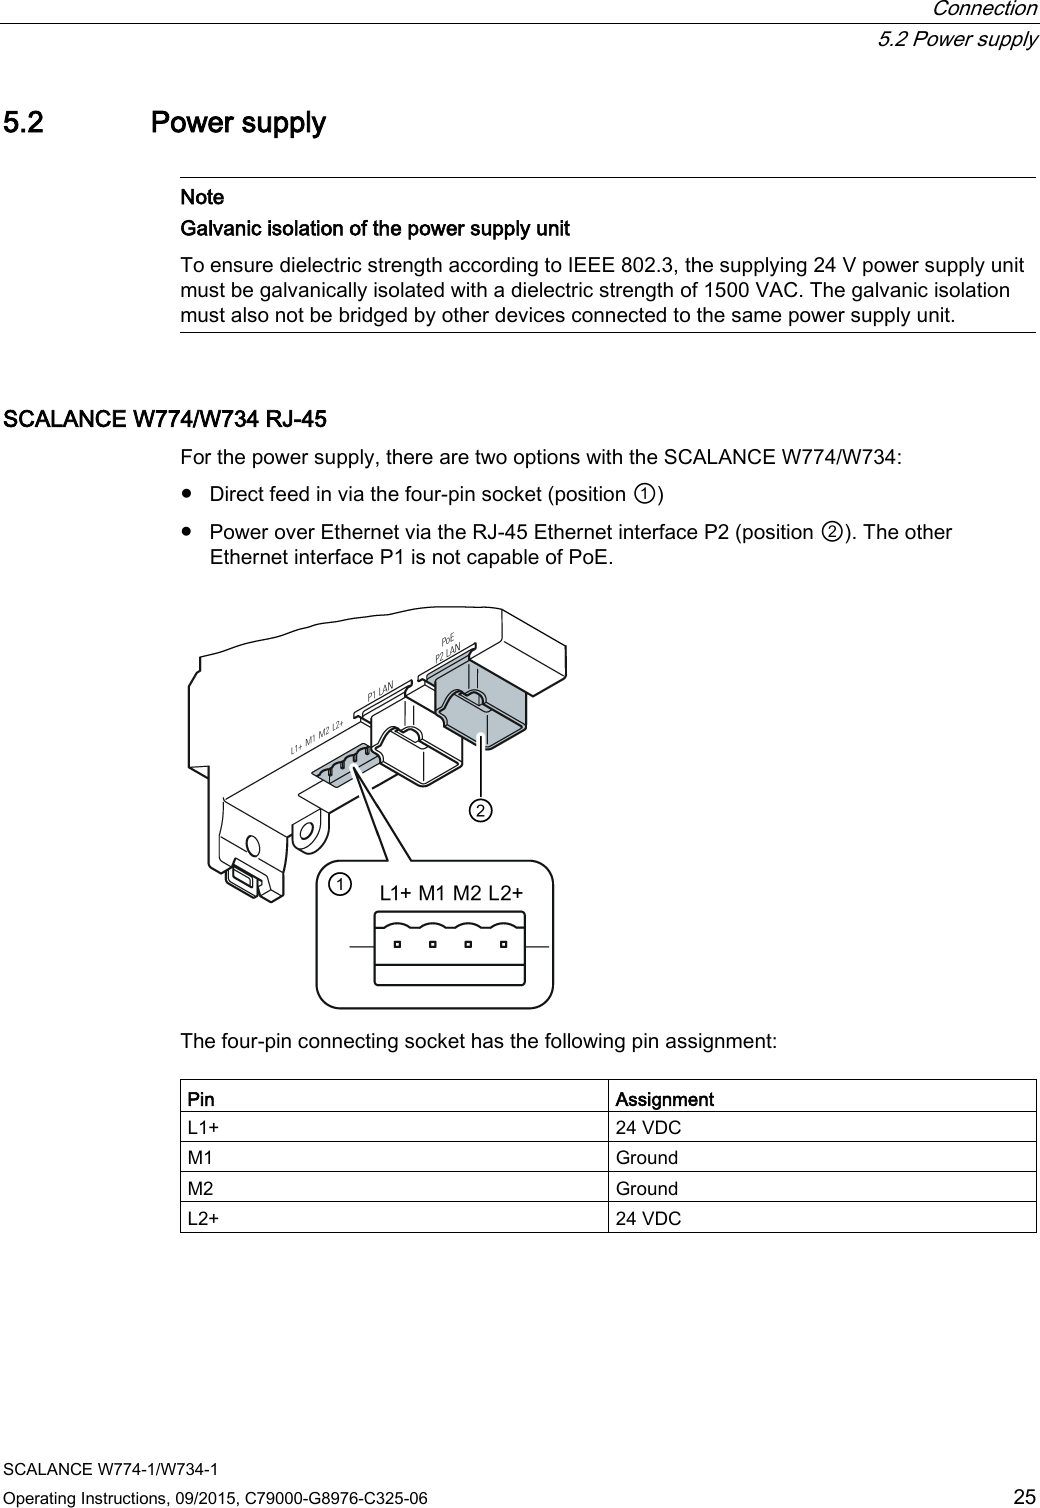  Connection  5.2 Power supply SCALANCE W774-1/W734-1 Operating Instructions, 09/2015, C79000-G8976-C325-06 25 5.2 Power supply   Note Galvanic isolation of the power supply unit To ensure dielectric strength according to IEEE 802.3, the supplying 24 V power supply unit must be galvanically isolated with a dielectric strength of 1500 VAC. The galvanic isolation must also not be bridged by other devices connected to the same power supply unit.  SCALANCE W774/W734 RJ-45 For the power supply, there are two options with the SCALANCE W774/W734: ● Direct feed in via the four-pin socket (position ①) ● Power over Ethernet via the RJ-45 Ethernet interface P2 (position ②). The other Ethernet interface P1 is not capable of PoE.  The four-pin connecting socket has the following pin assignment:  Pin Assignment L1+ 24 VDC M1 Ground M2 Ground L2+ 24 VDC 